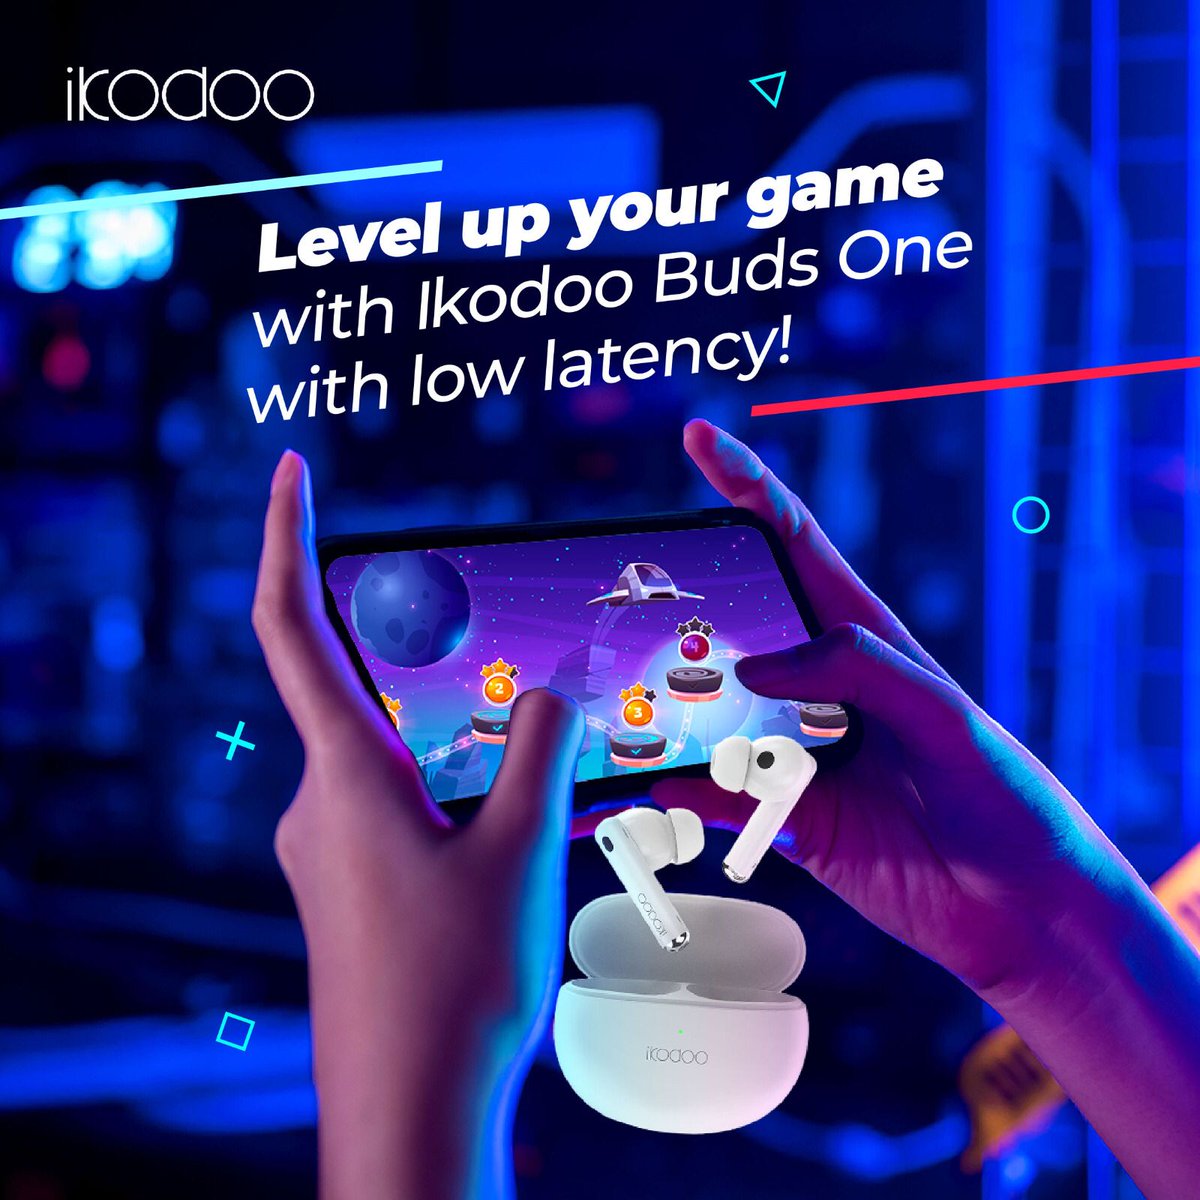 Unleash gaming greatness with ultra-low latency, where every sound and victory syncs seamlessly for an epic adventure like never before. #IkodooBudsOne #AudioExcellence #ImmersiveSound #Ikodoo #Earbuds #soundengineering #soundenhancement #vifa #immersiveexperience